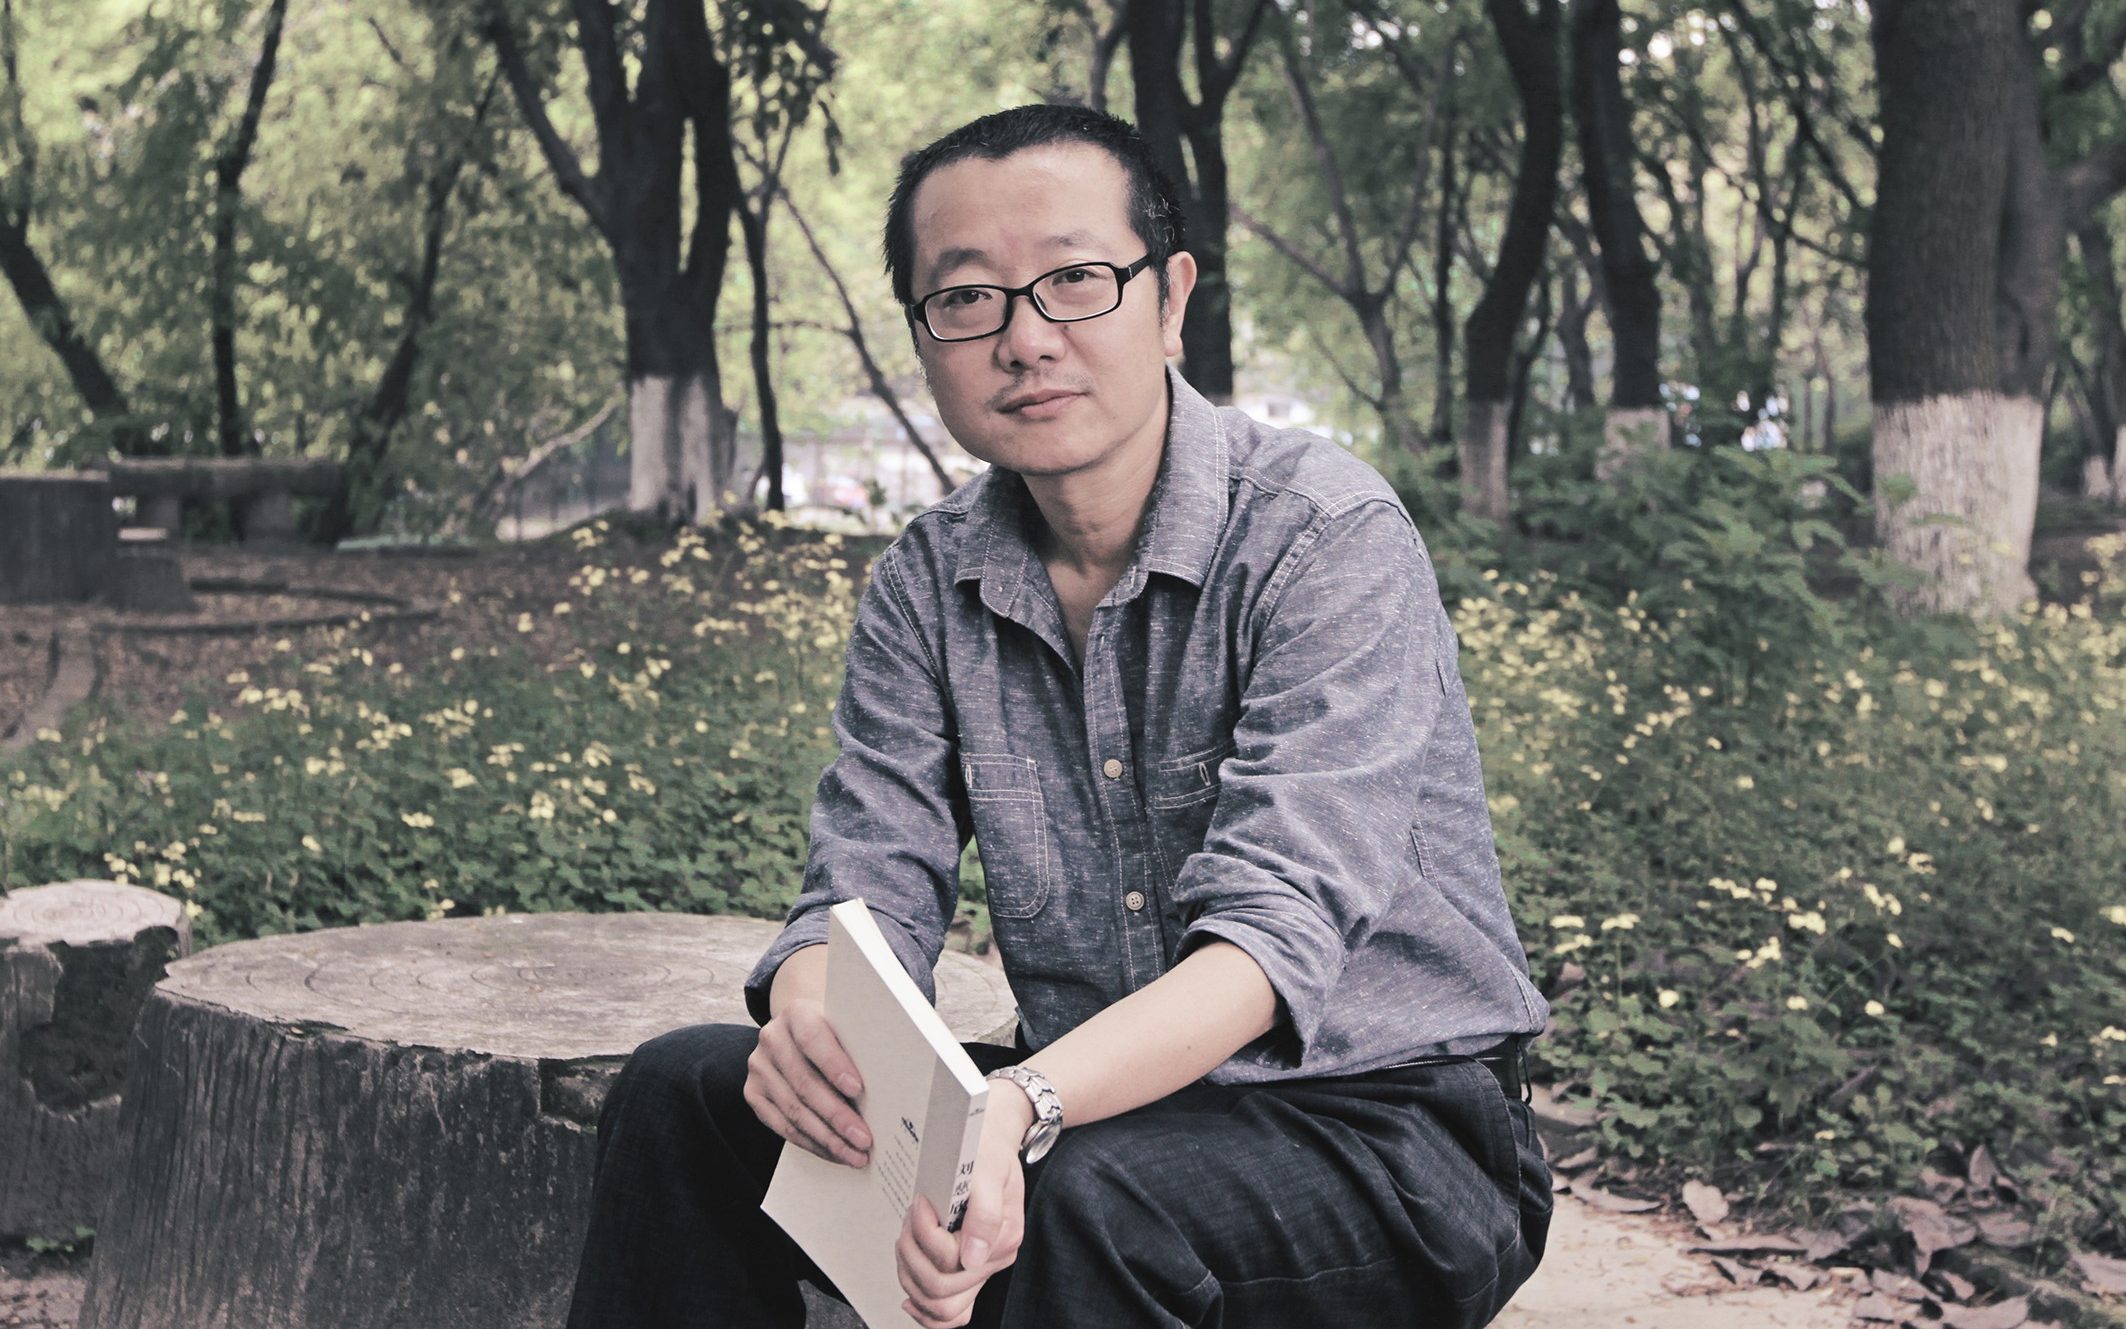 cixin liu, china’s megastar author: ‘people are comfortable. they don’t want any more progress’